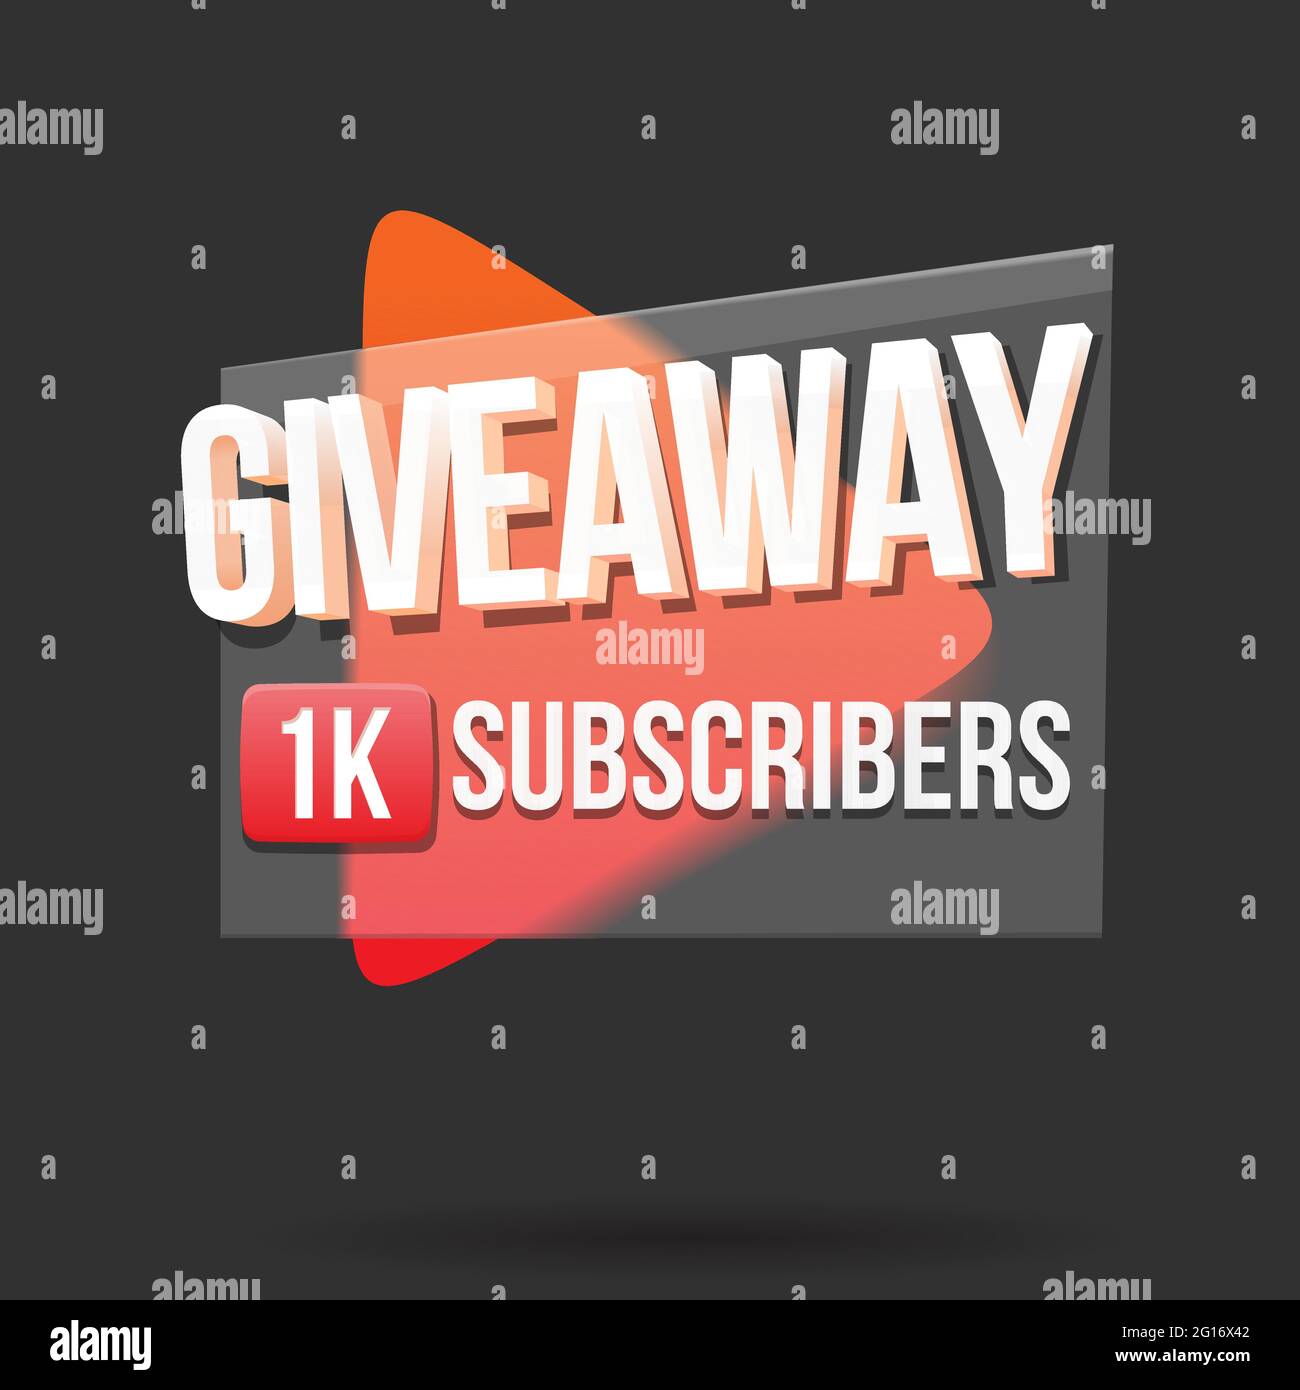 giveaway 1K (1000) subcribers. template design for social media post or website banner. Clean illustration with modern typography text style vector il Stock Vector